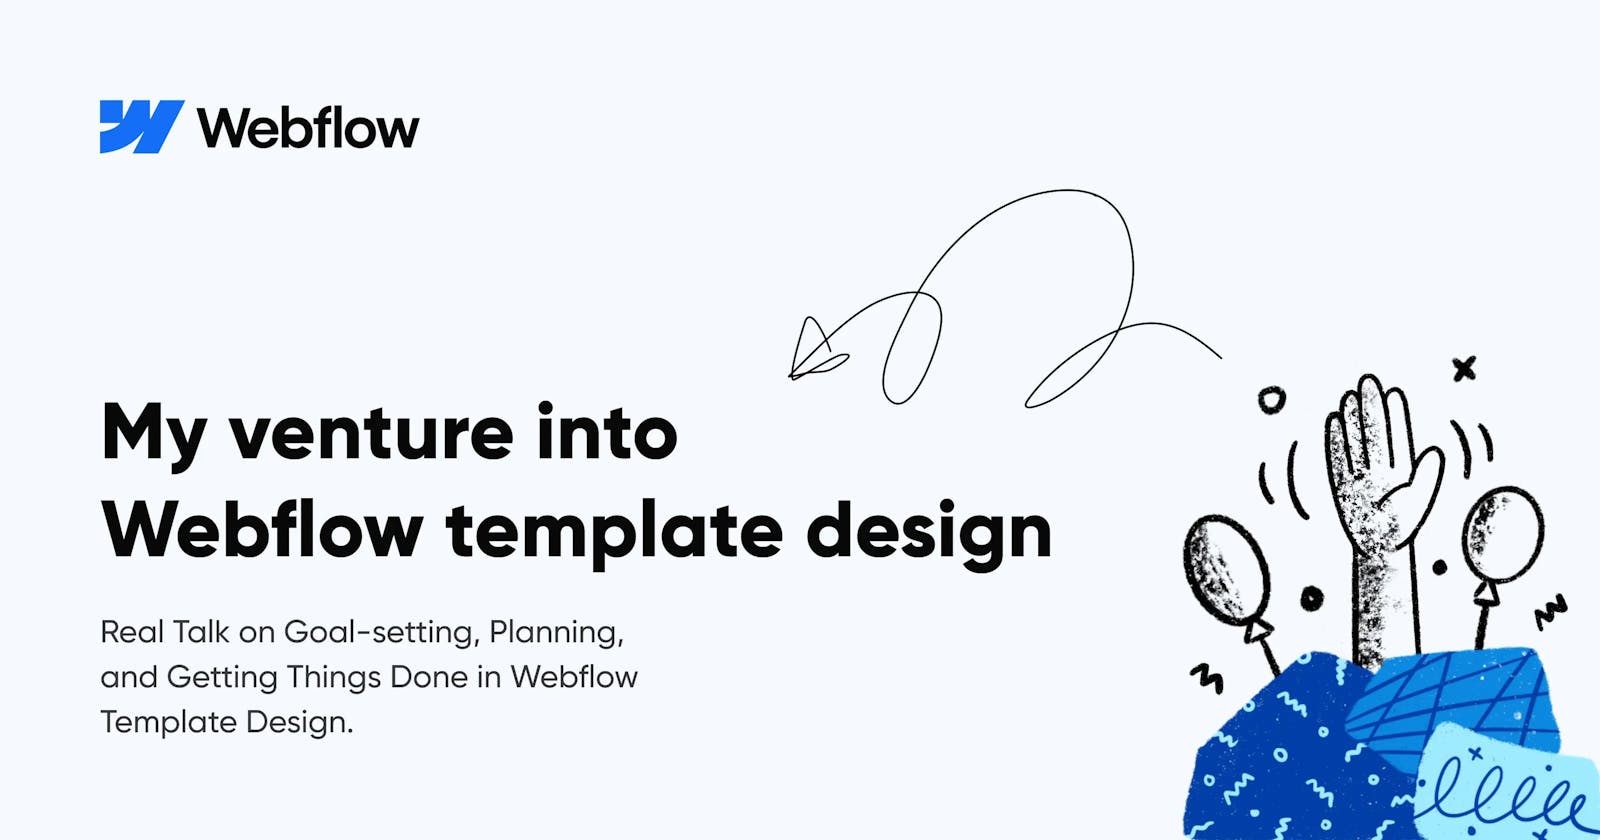 My venture into Webflow template design: Goal-setting, Planning, and Tasks